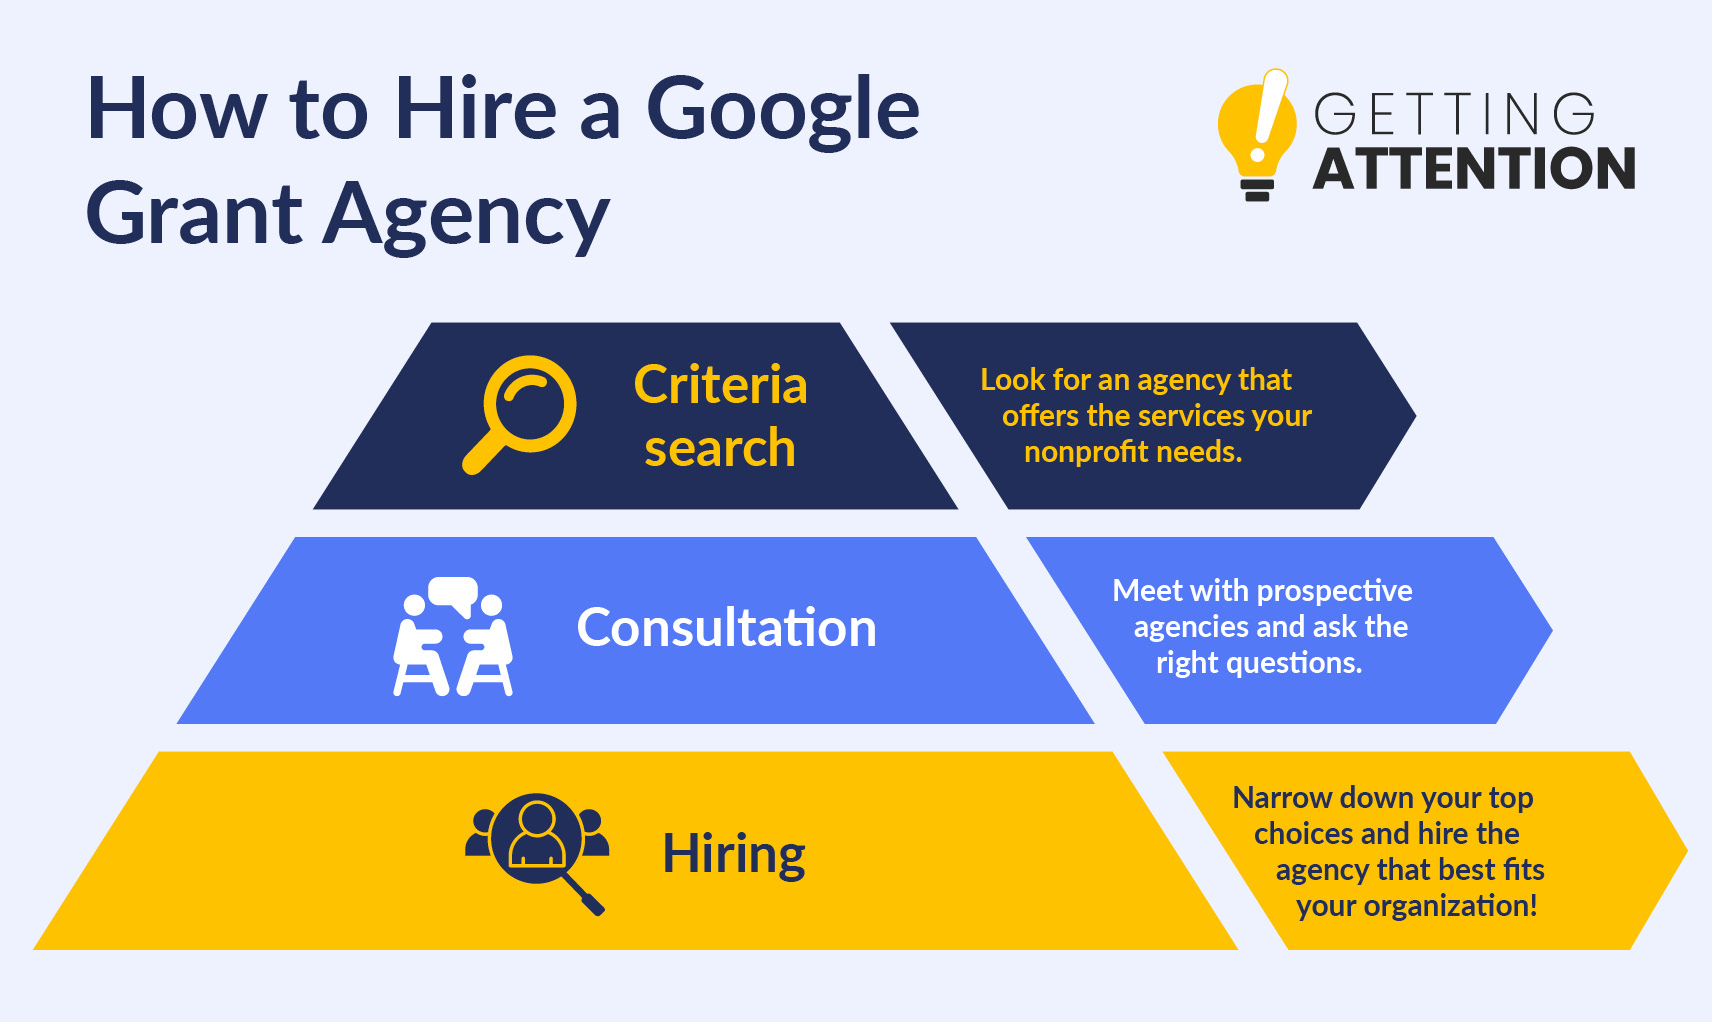 This graphic shows the three stages of the Google Grant agency hiring process.